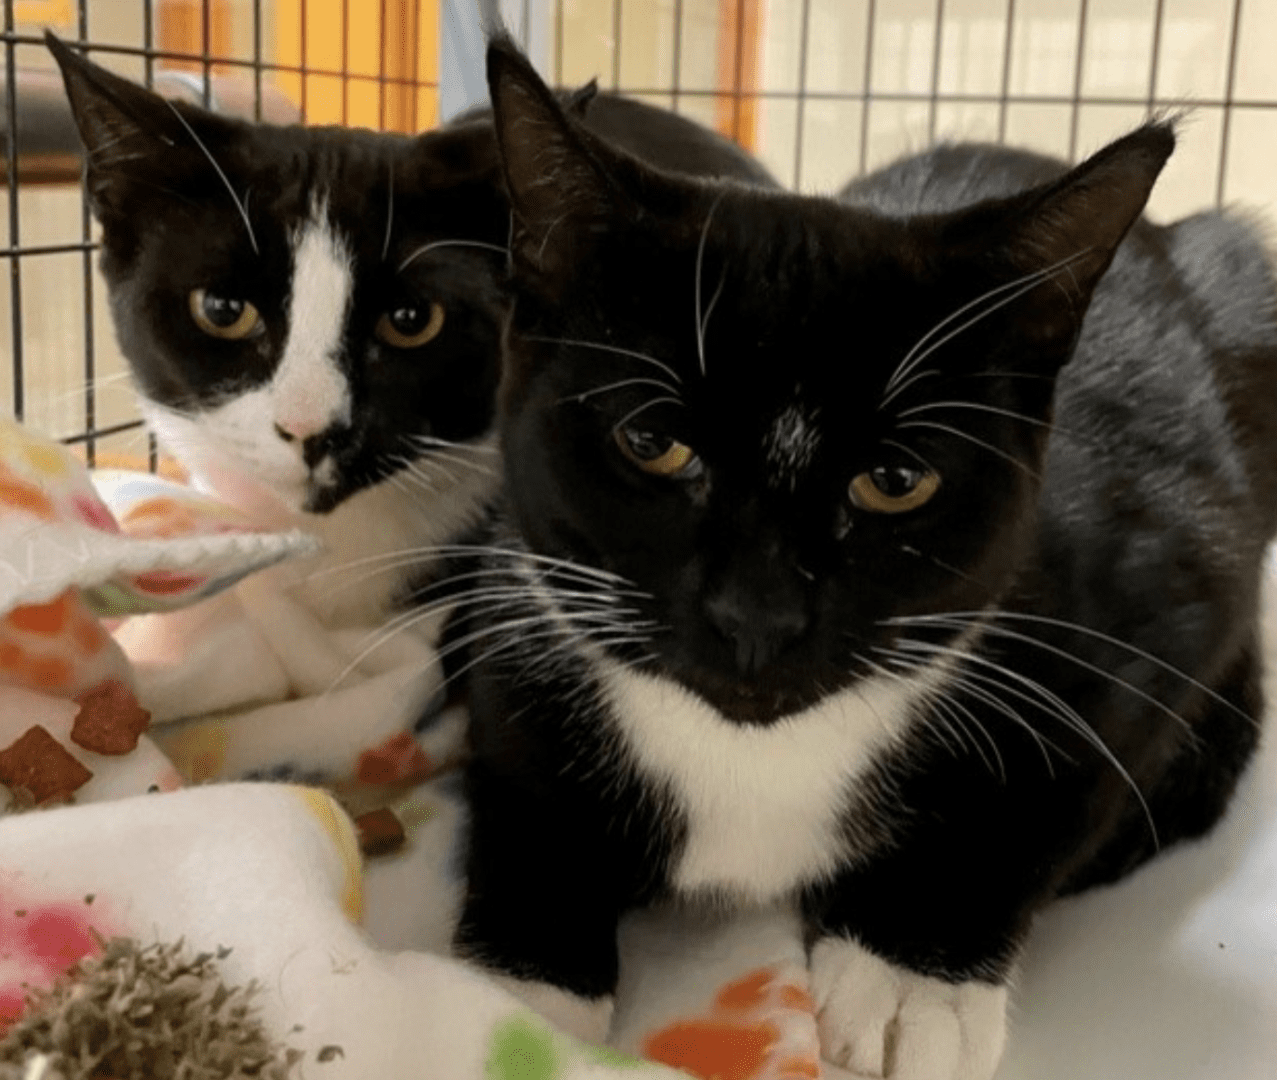 Two black and white cats in a cage.